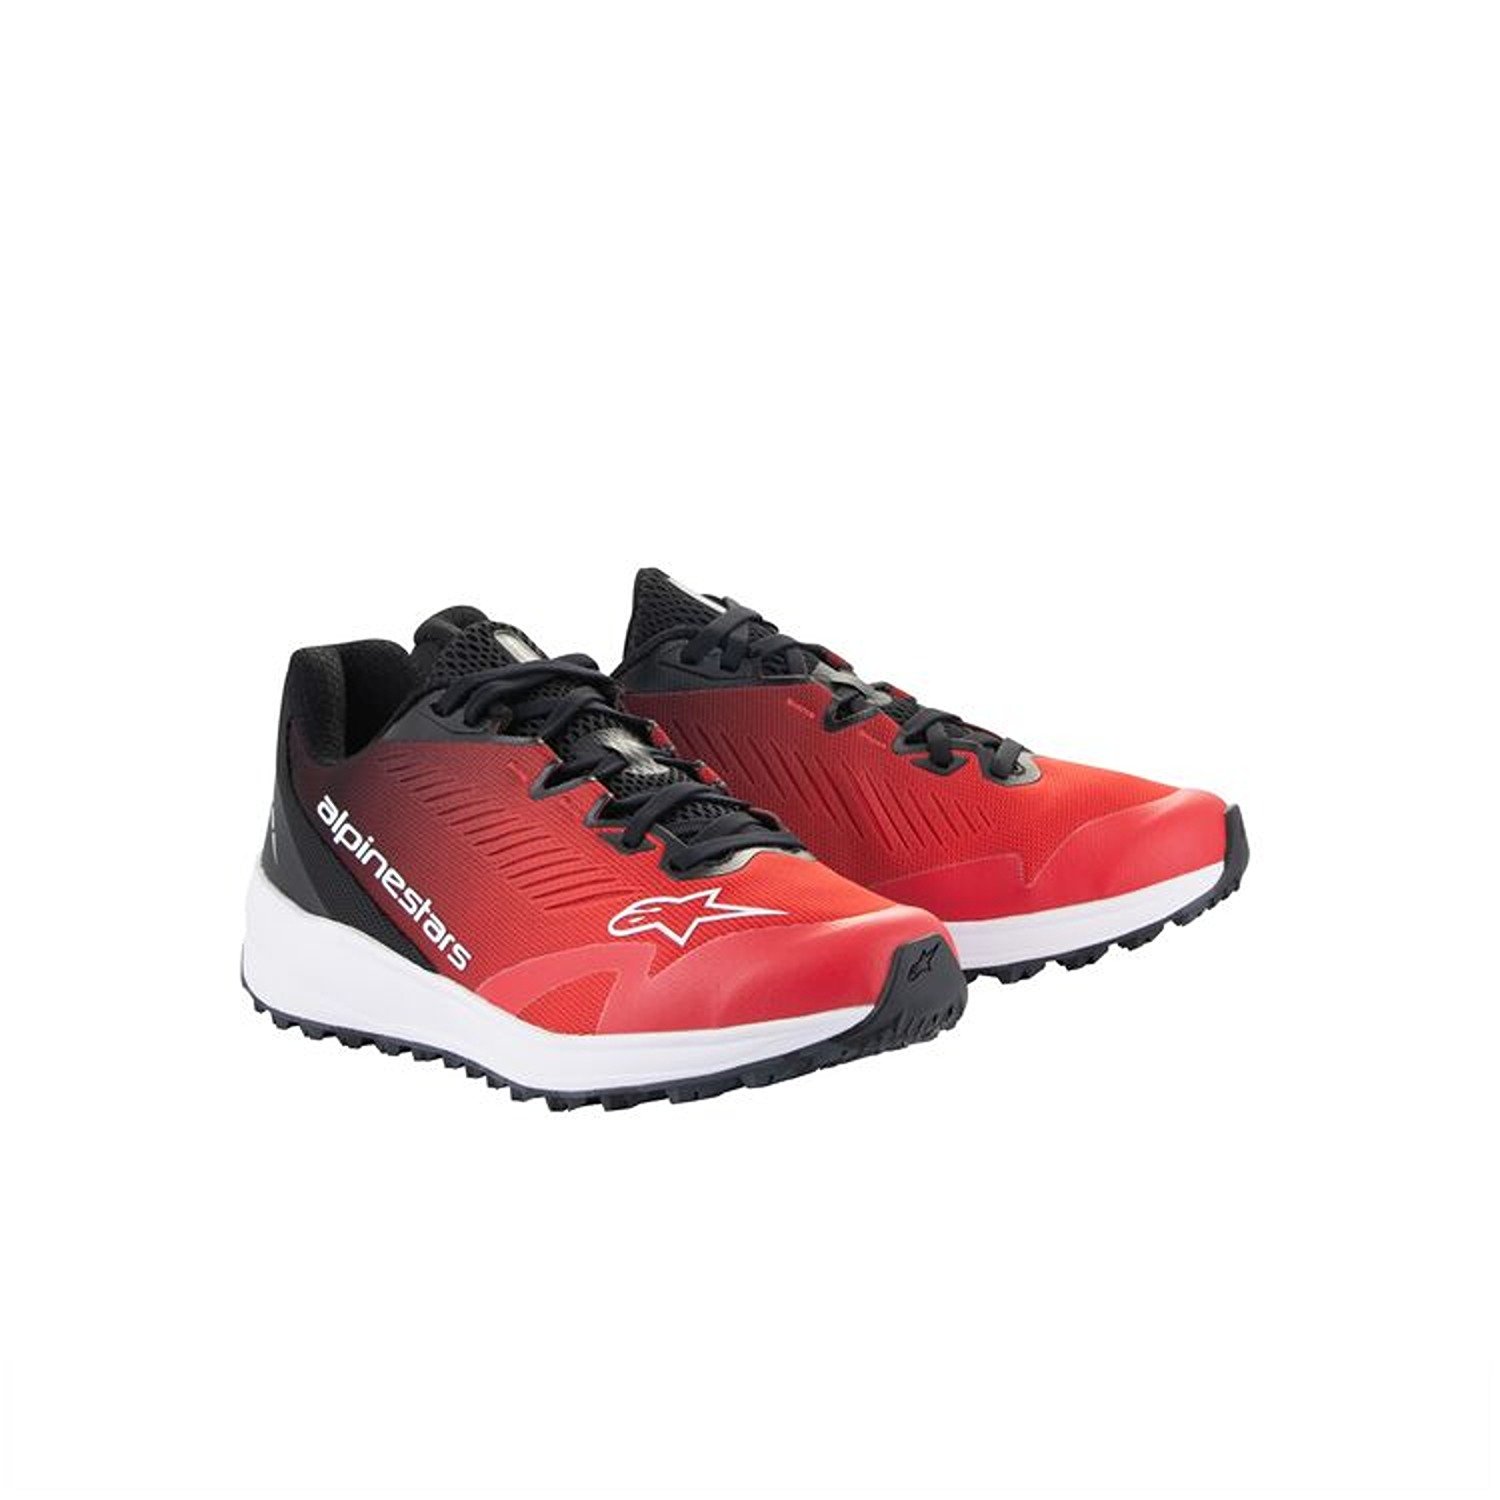 Image of Alpinestars Meta Road V2 Shoes Red Black White Taille US 11